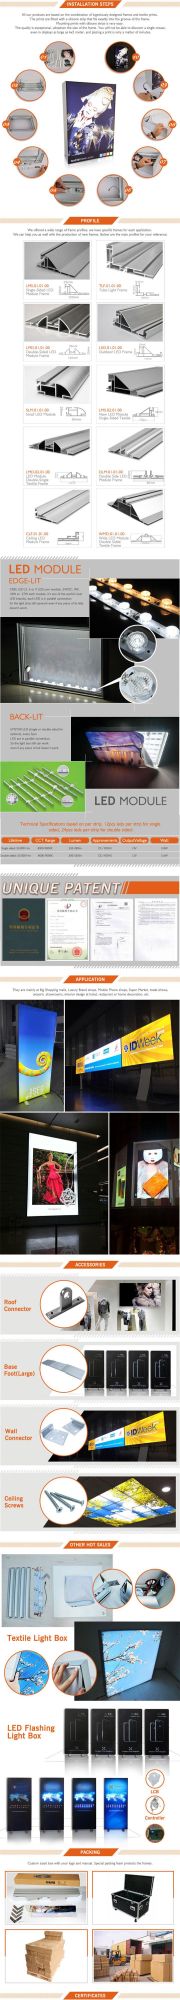 LED Fabric L Shape Lightbox for Advertising Commercial Application Exhibition Booth Display Equipment